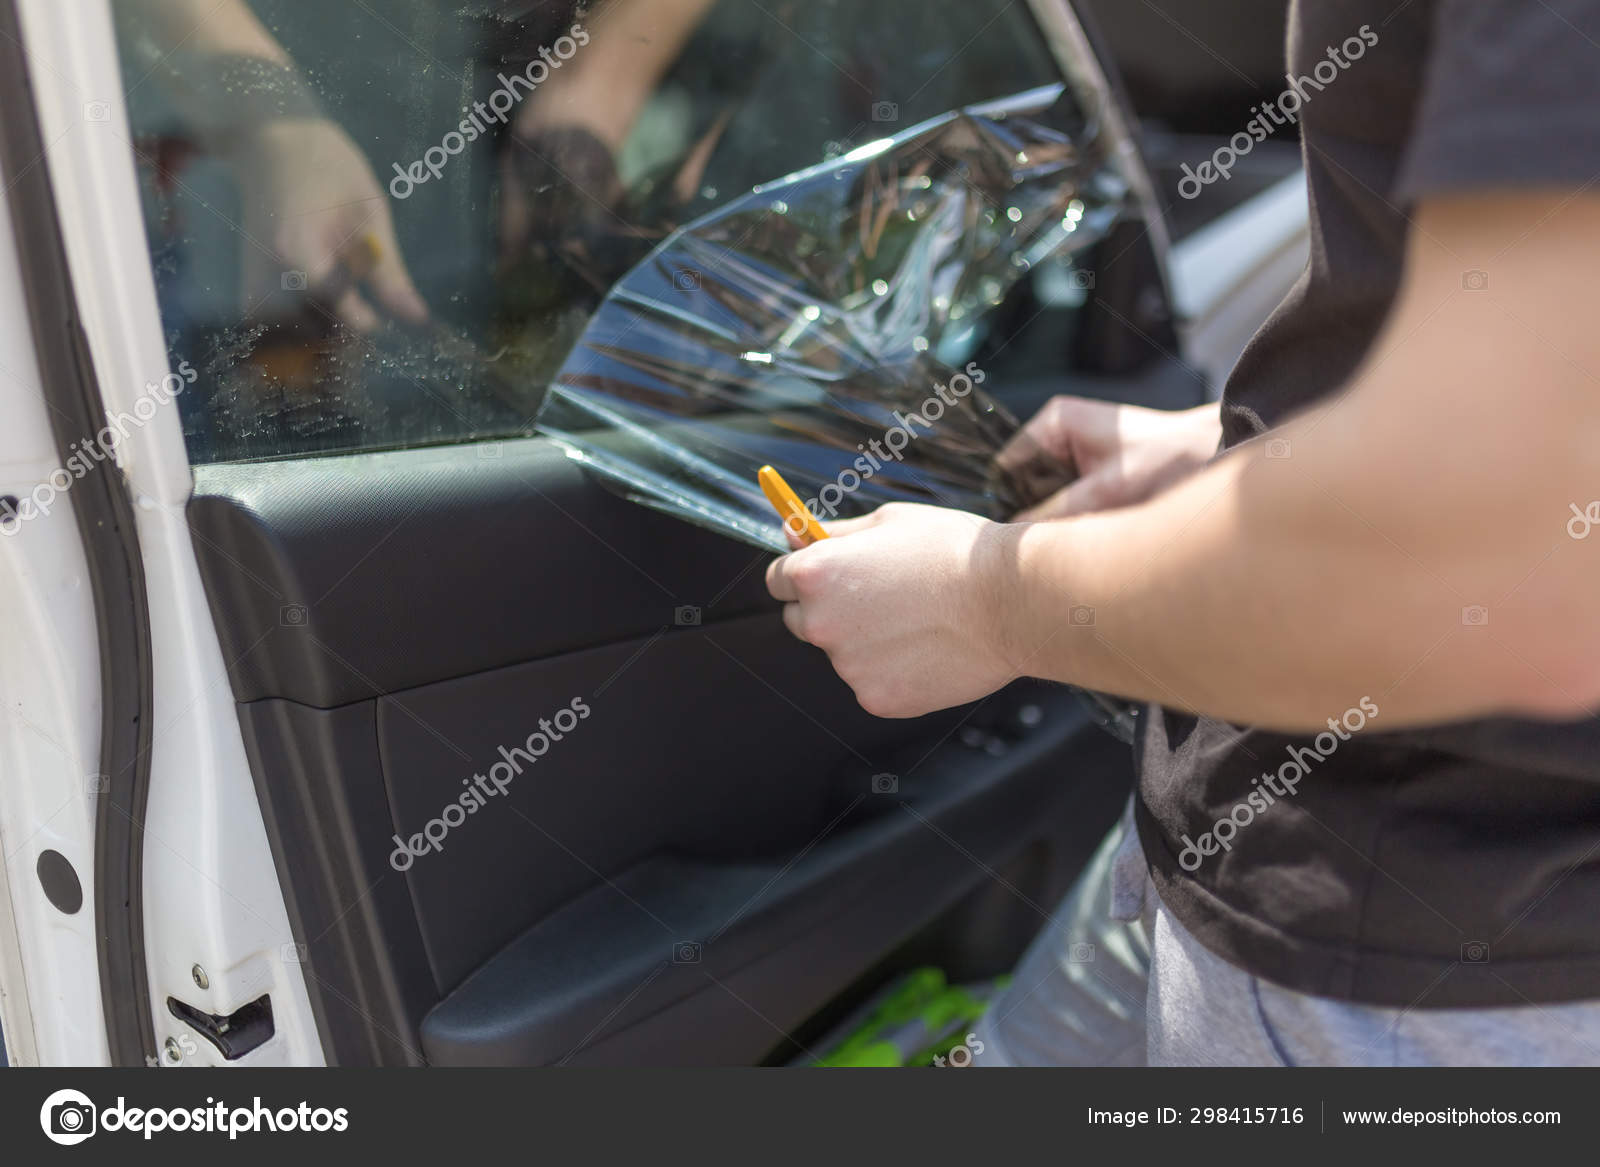 Tinted dark glass foil removal from car window. Stock Photo by